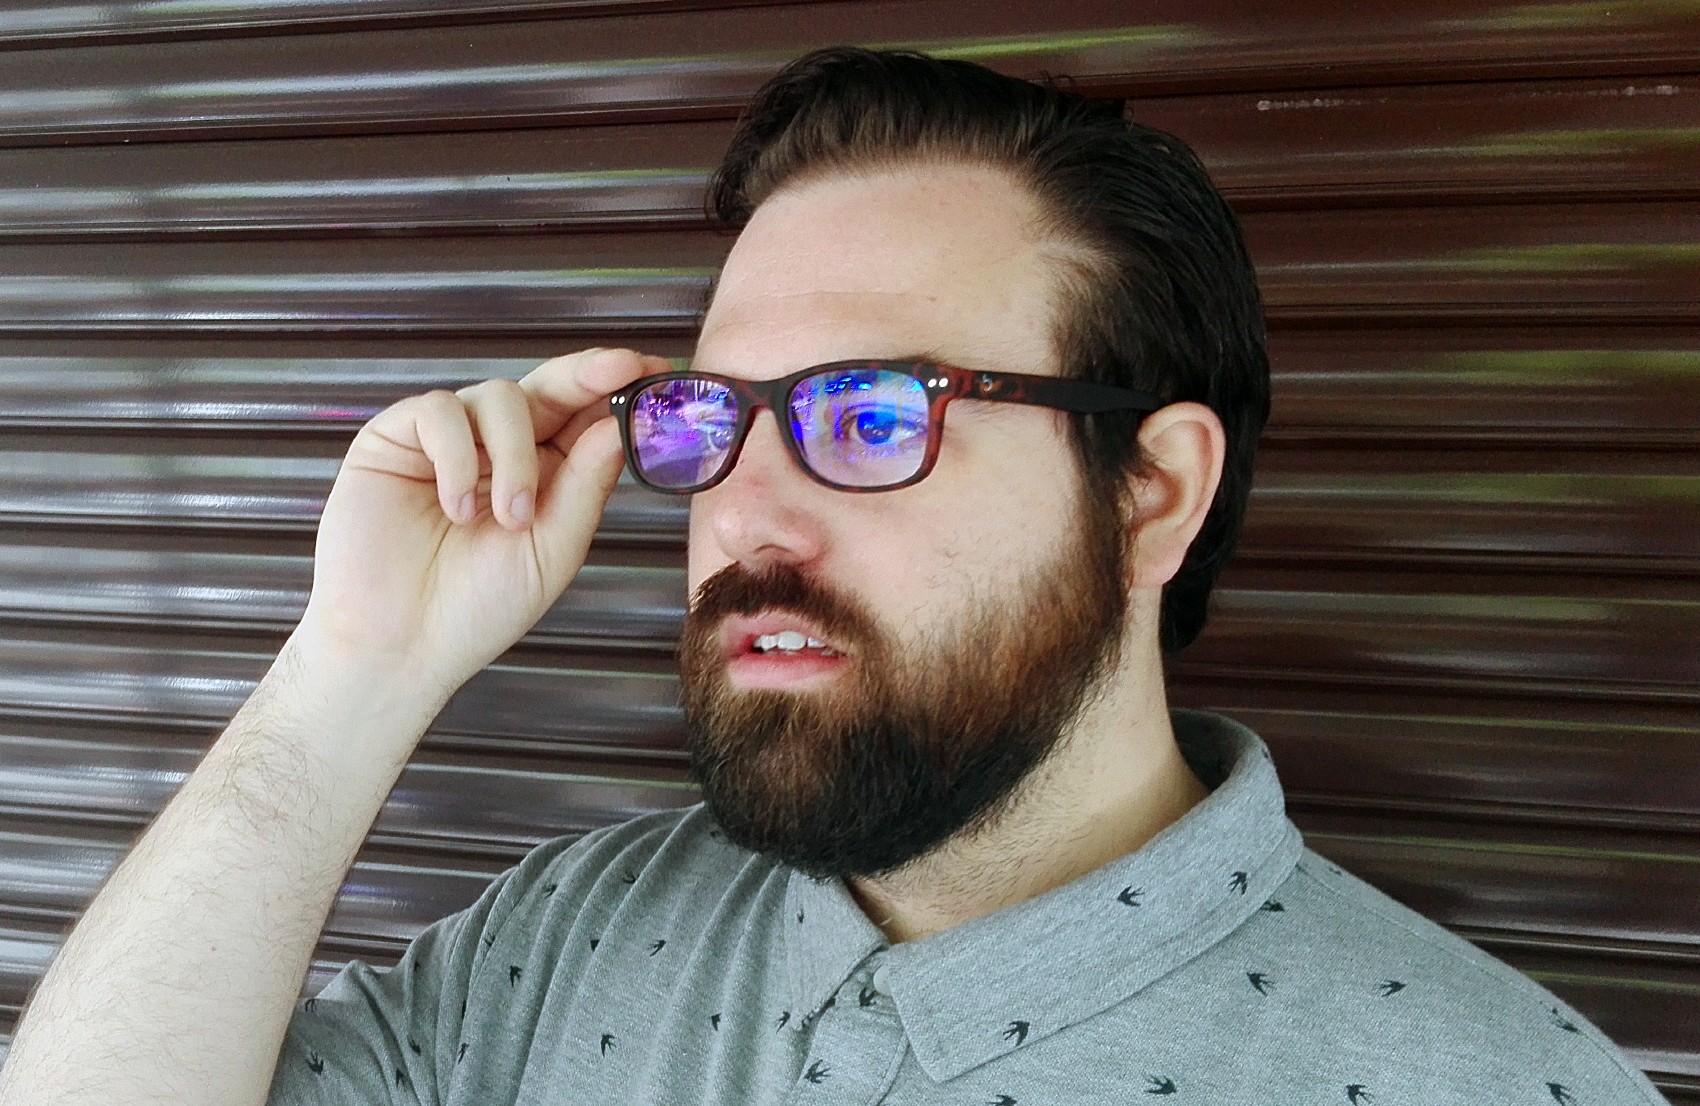 Review: Gafas Blueberry